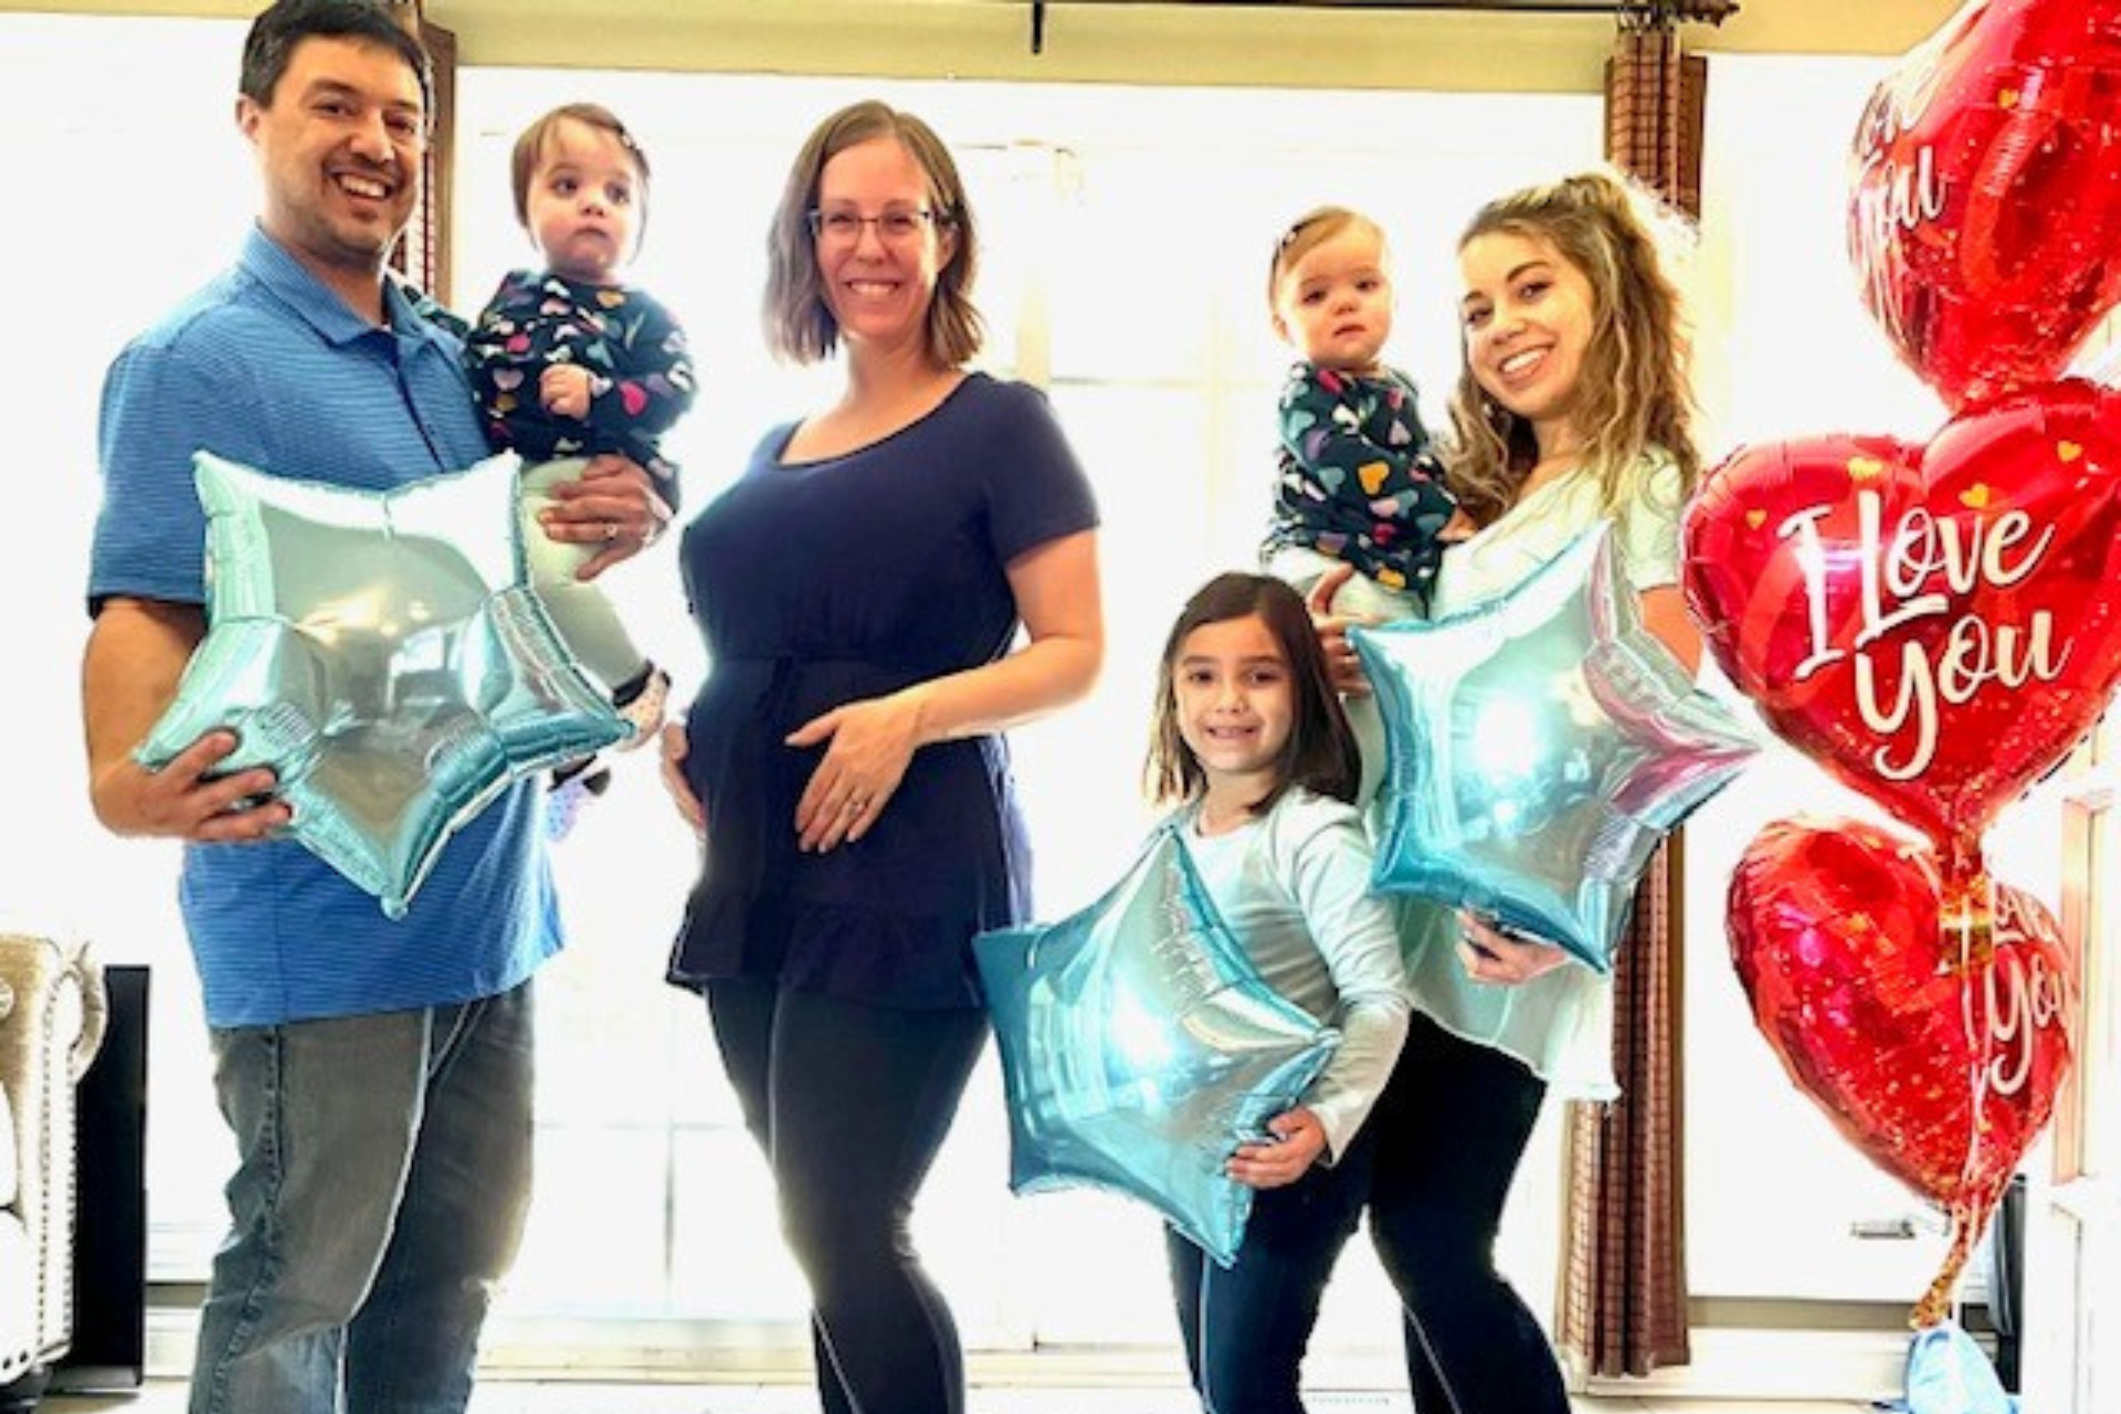 Smiling family with pregnant mom in the center. Star and heart shaped balloons surround the family.